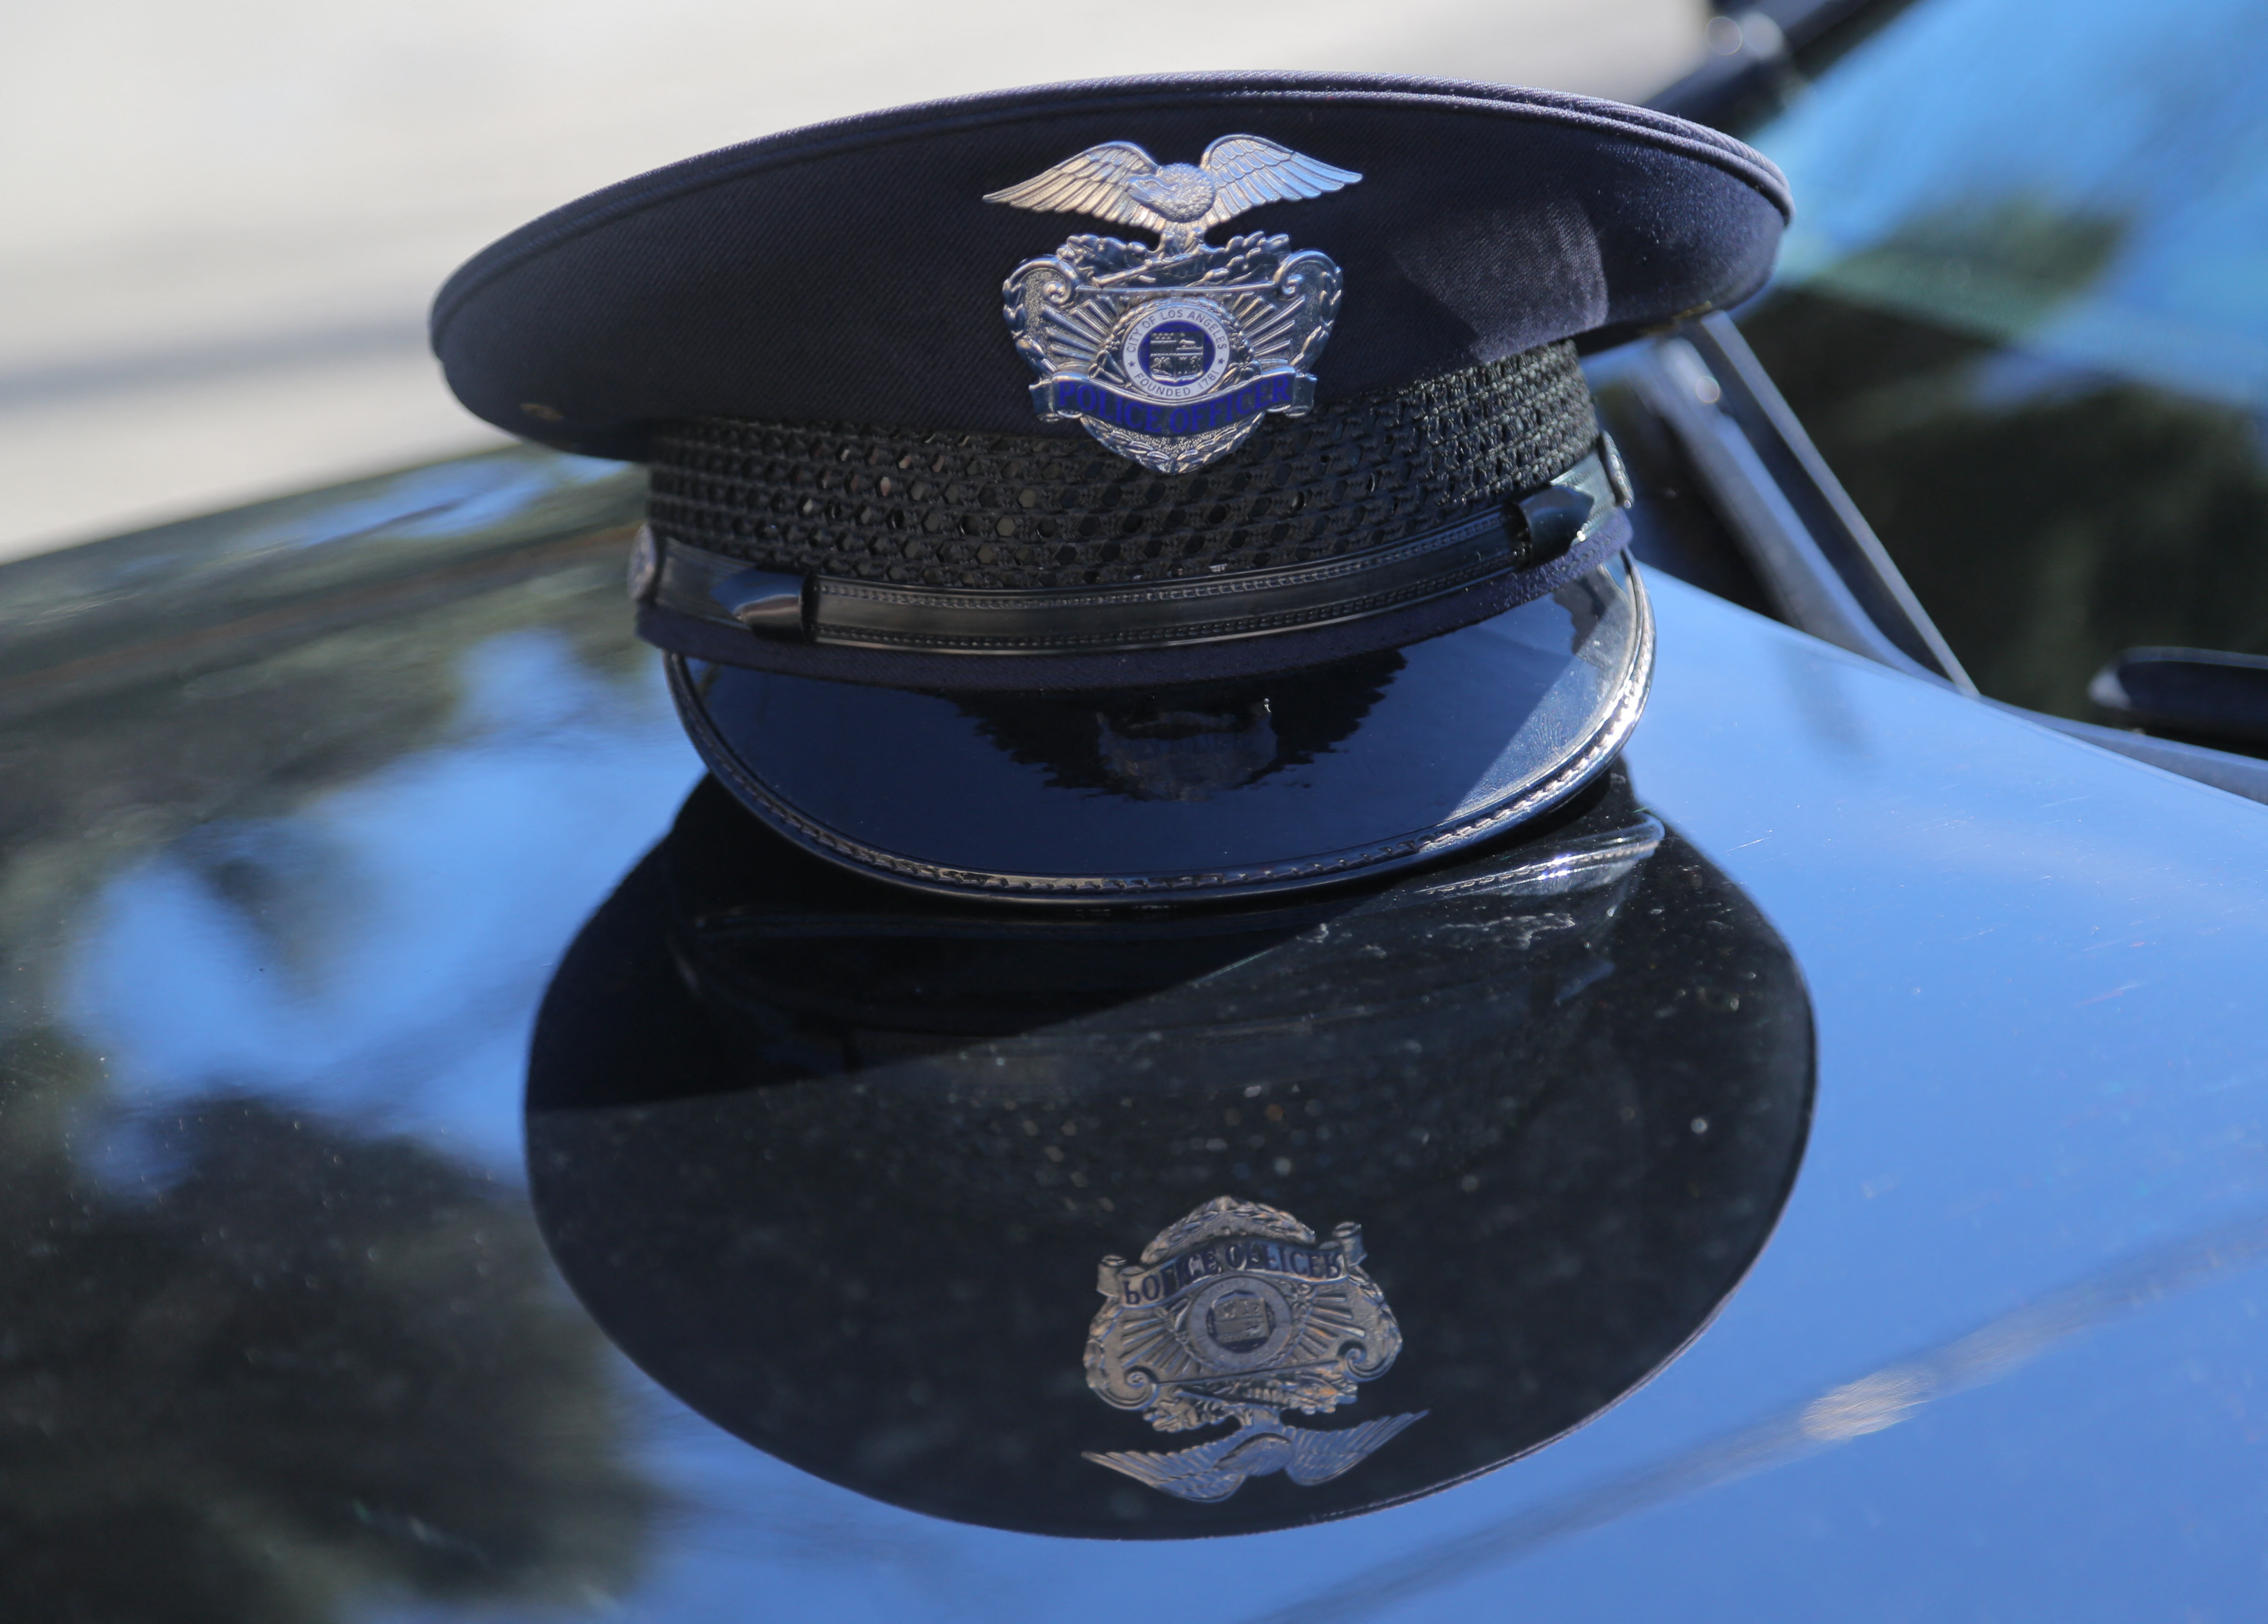 A Los Angeles Police Department (LAPD) officer's cap rests on the hood of a patrol vehicle in Los Angeles